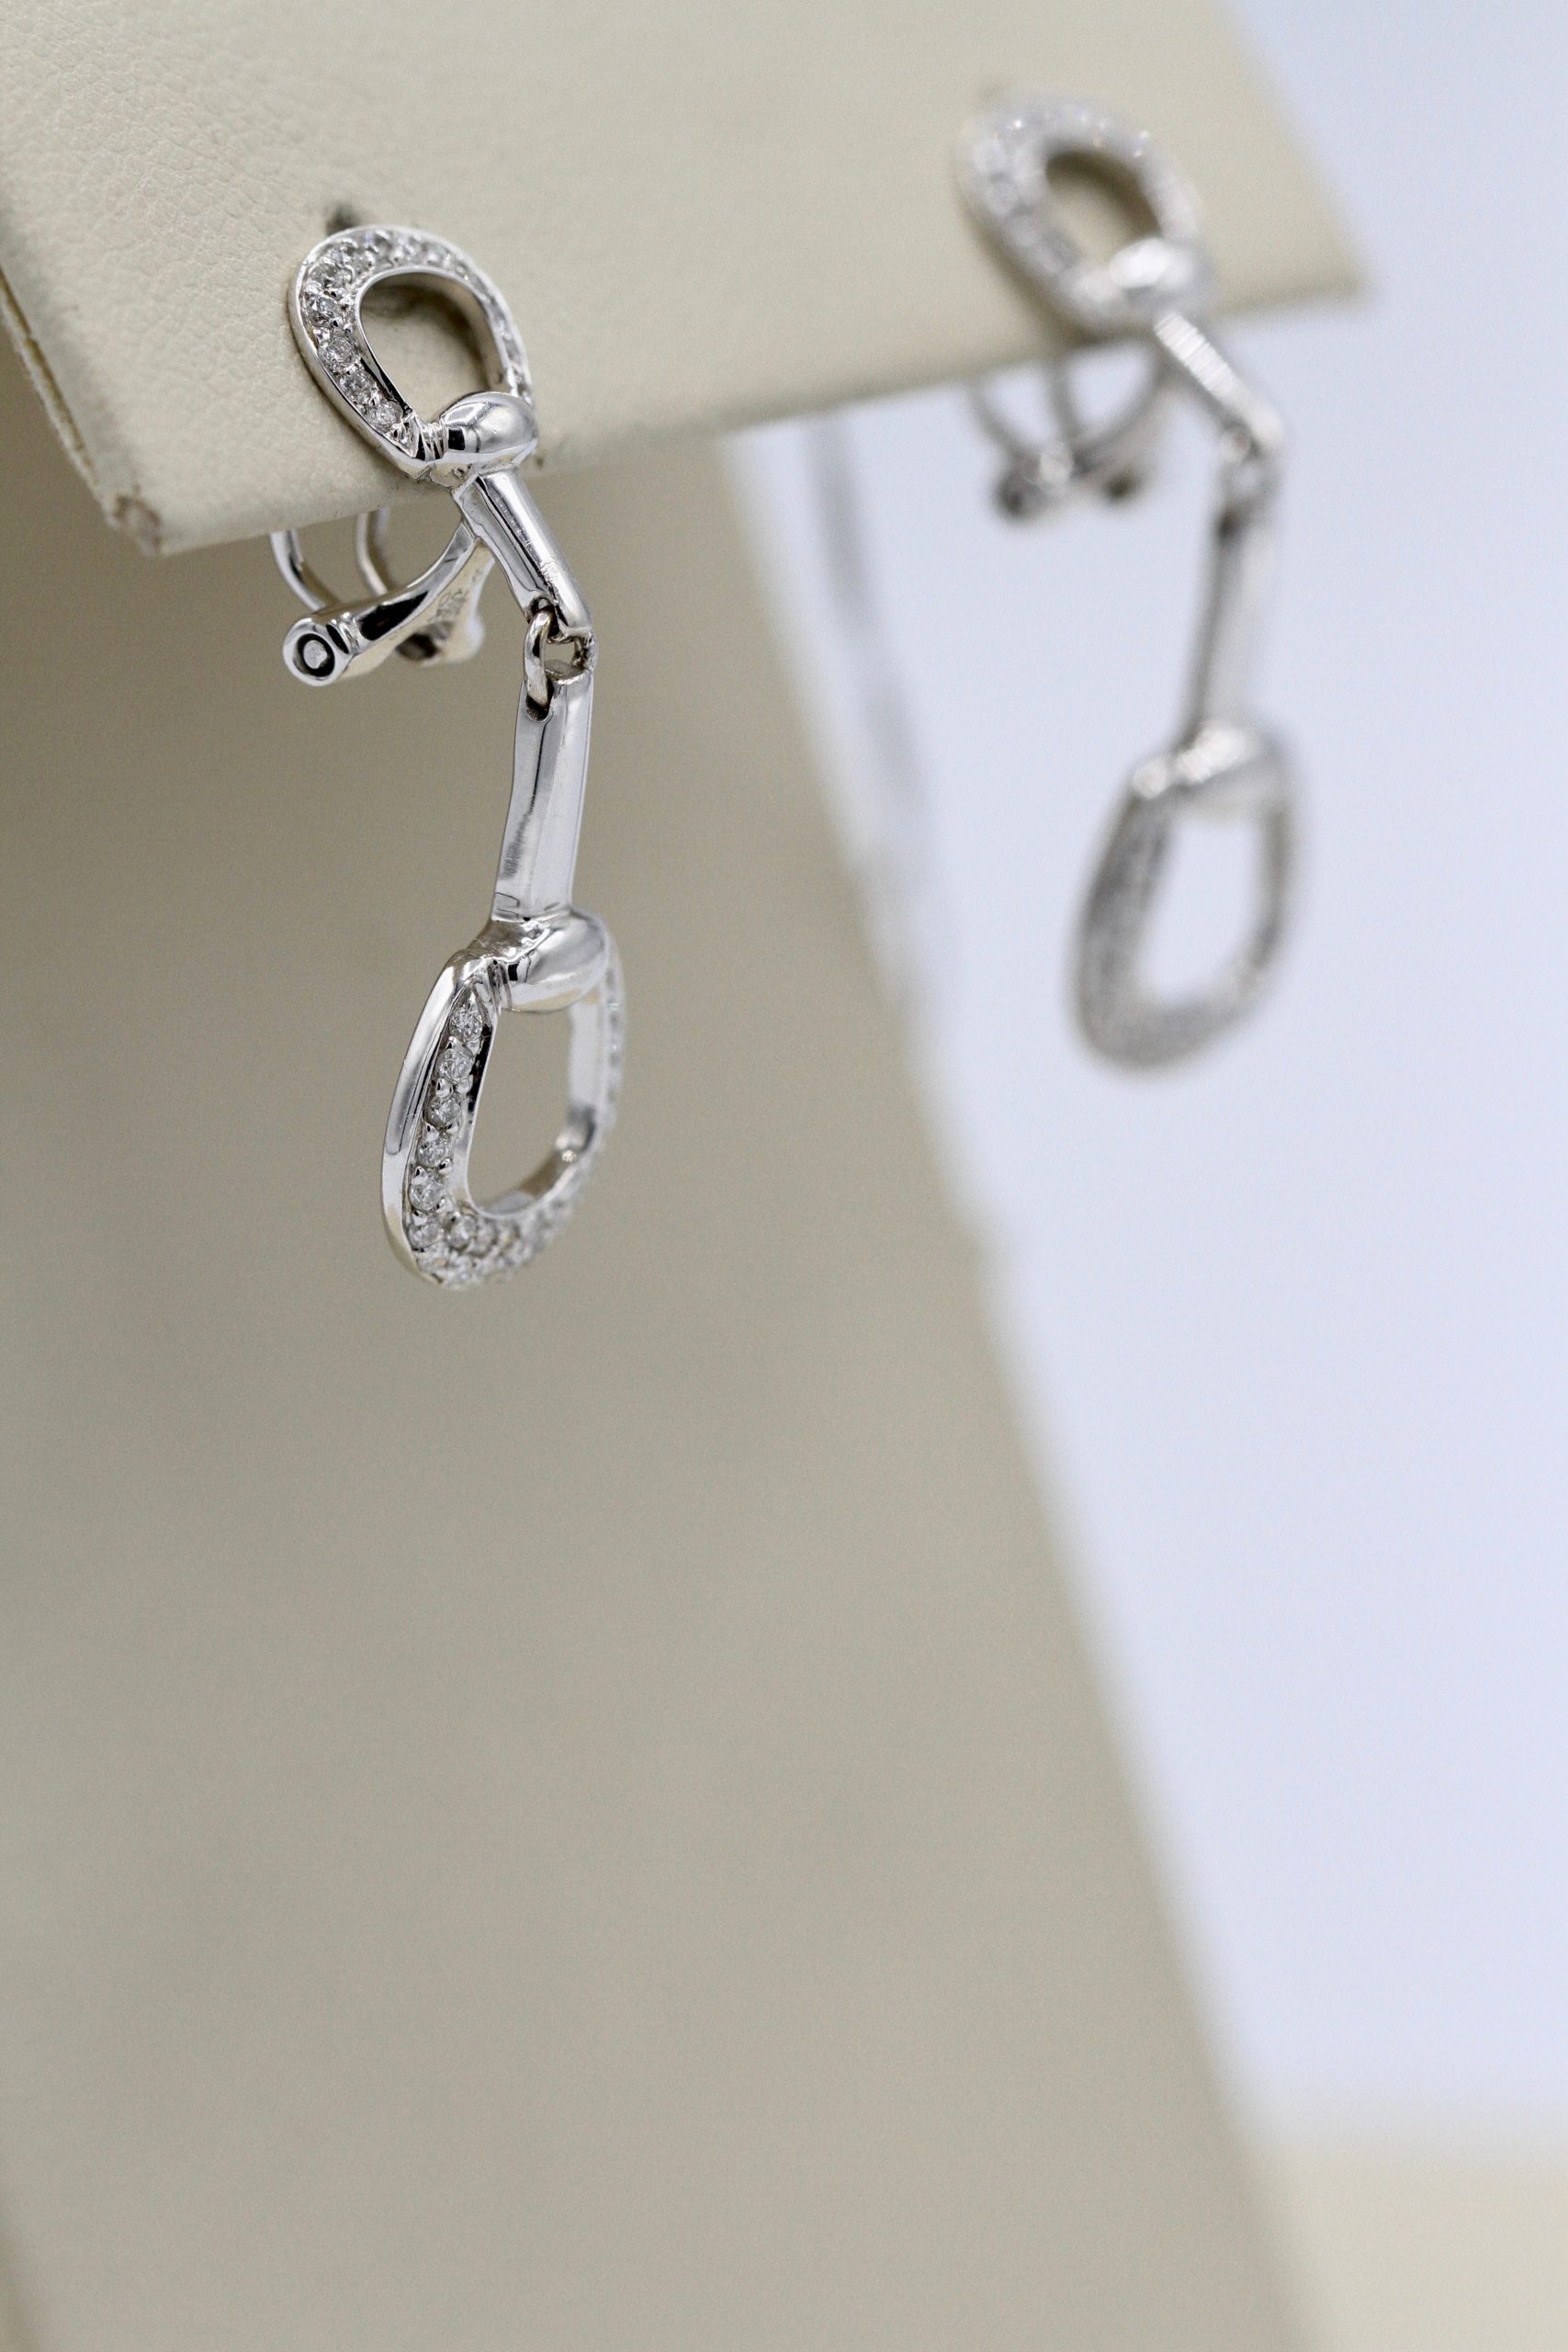 Silver earrings in the shape of horseshoes